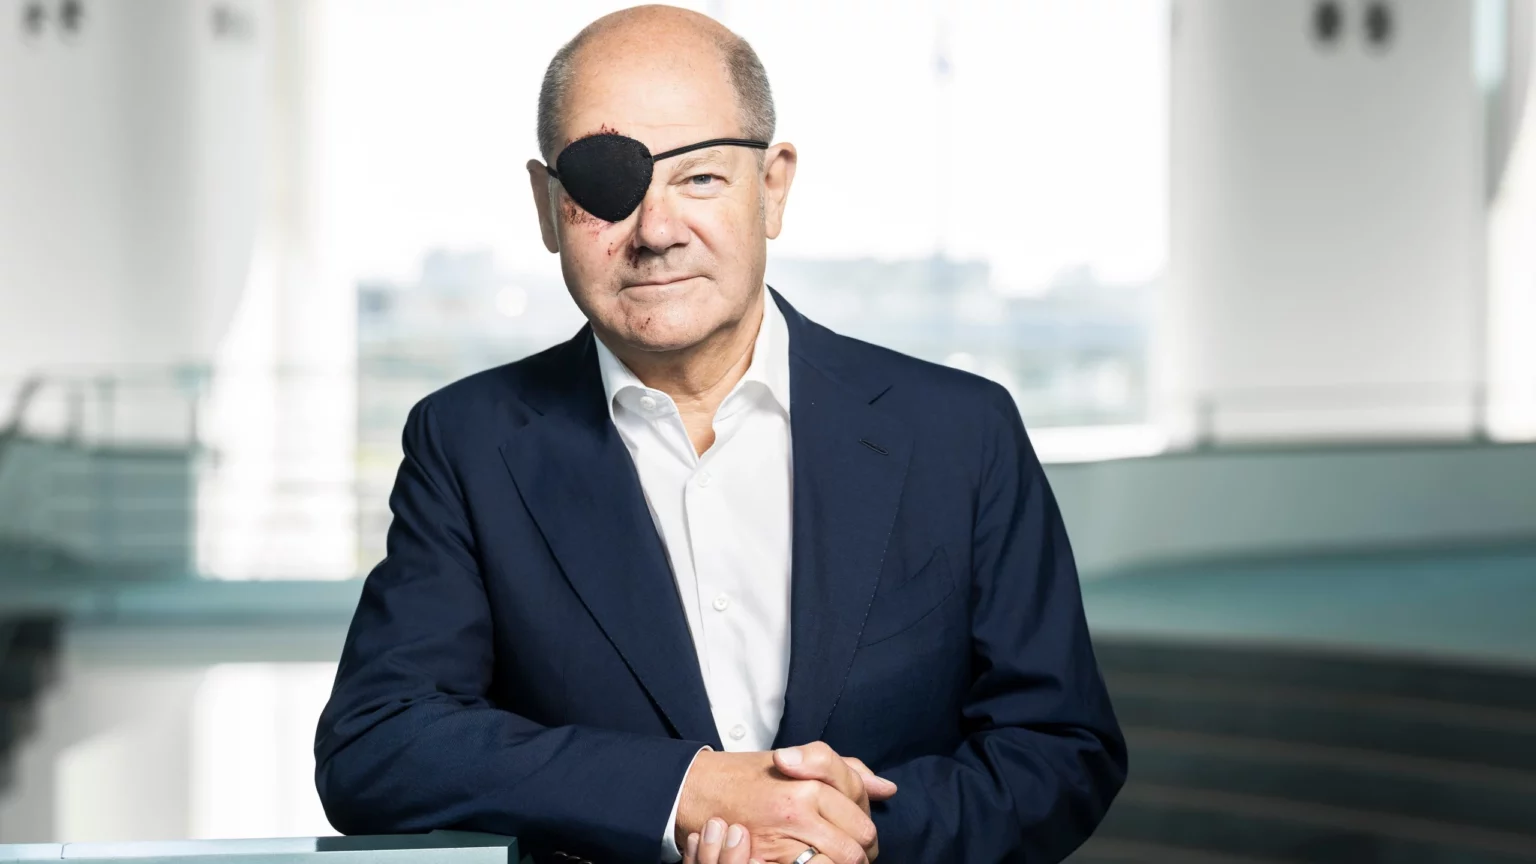 german-chancellor-scholz-tweets-a-pirate-style-picture-of-himself-with-a-black-eye-patch-after-a-jogging-accident